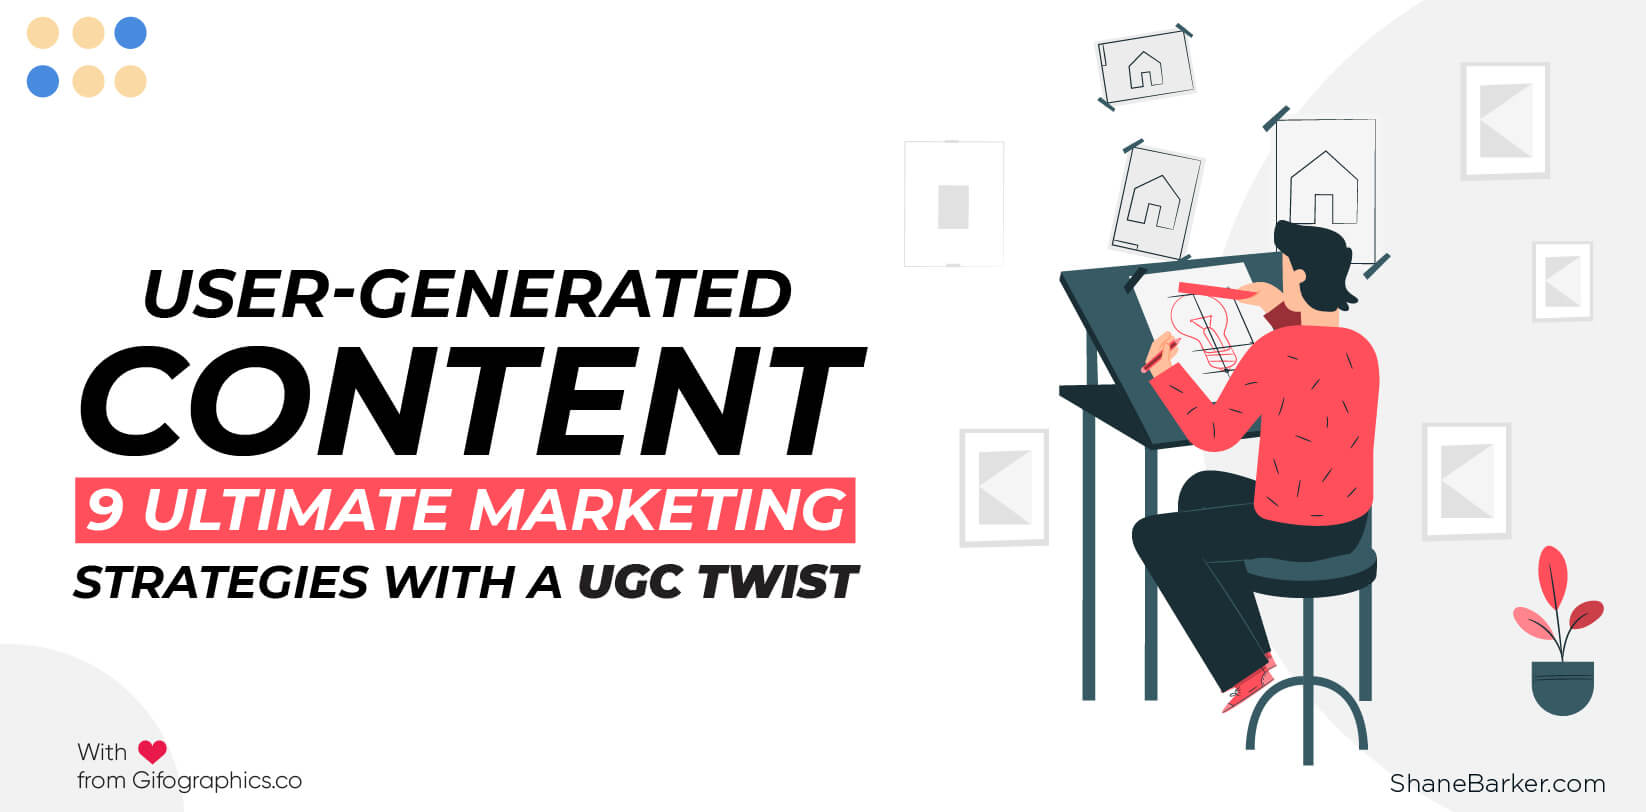 User-Generated Content- 9 Ultimate Marketing Strategies with a UGC Twist